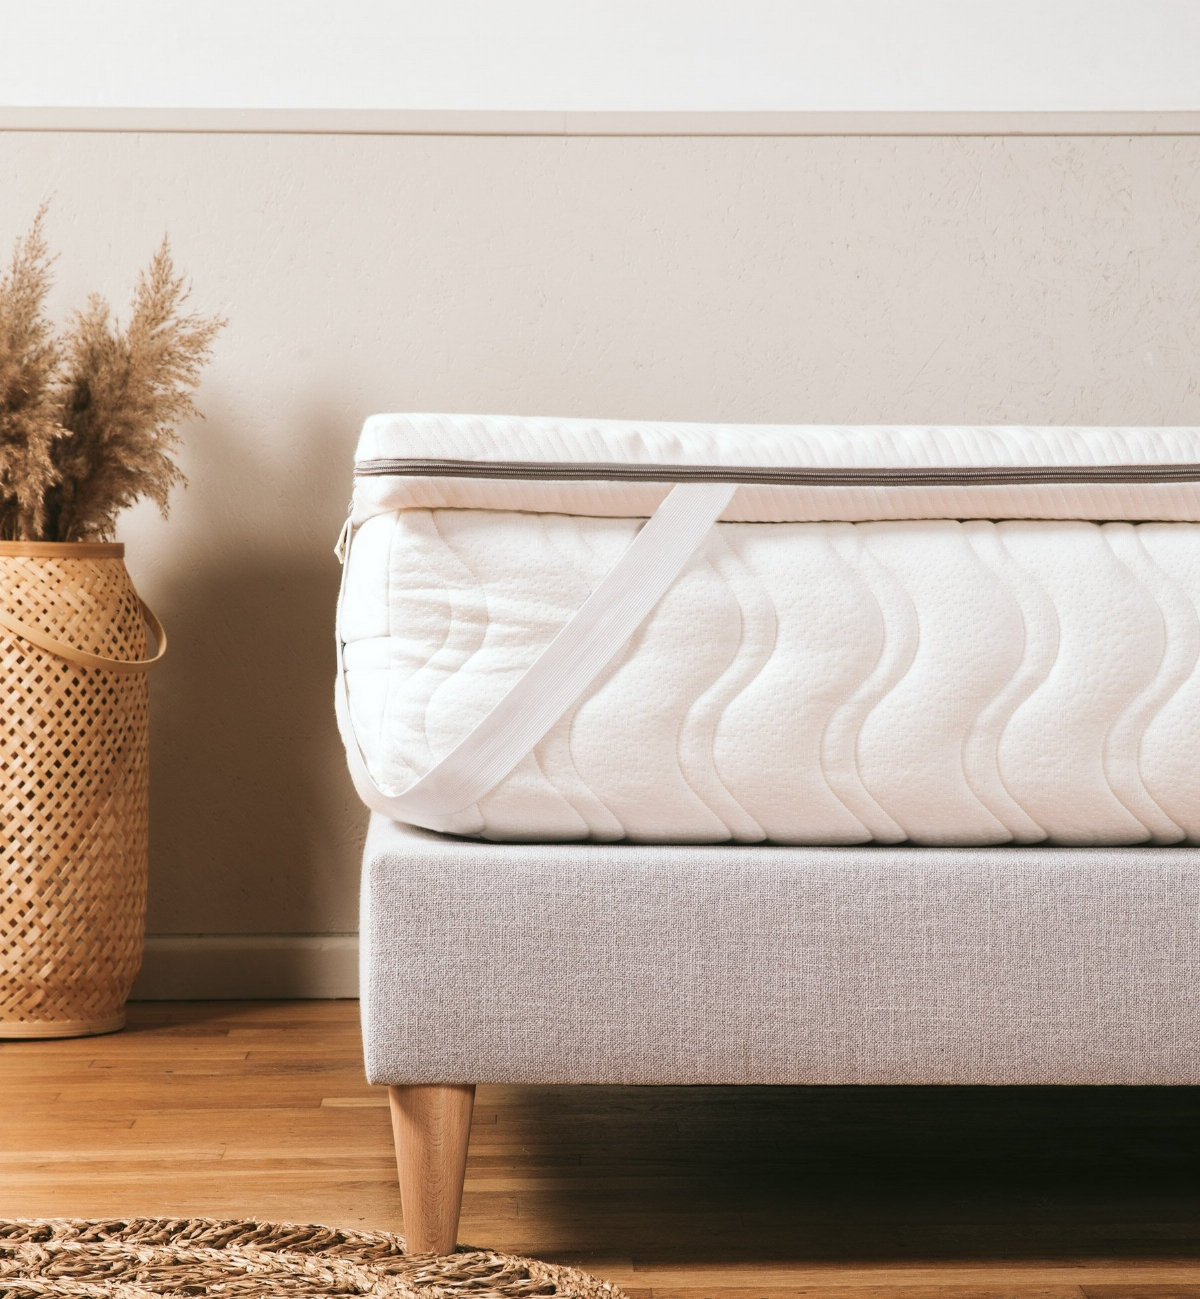 Natural latex mattress topper for double beds, the ideal solution for boosting the comfort of your mattress